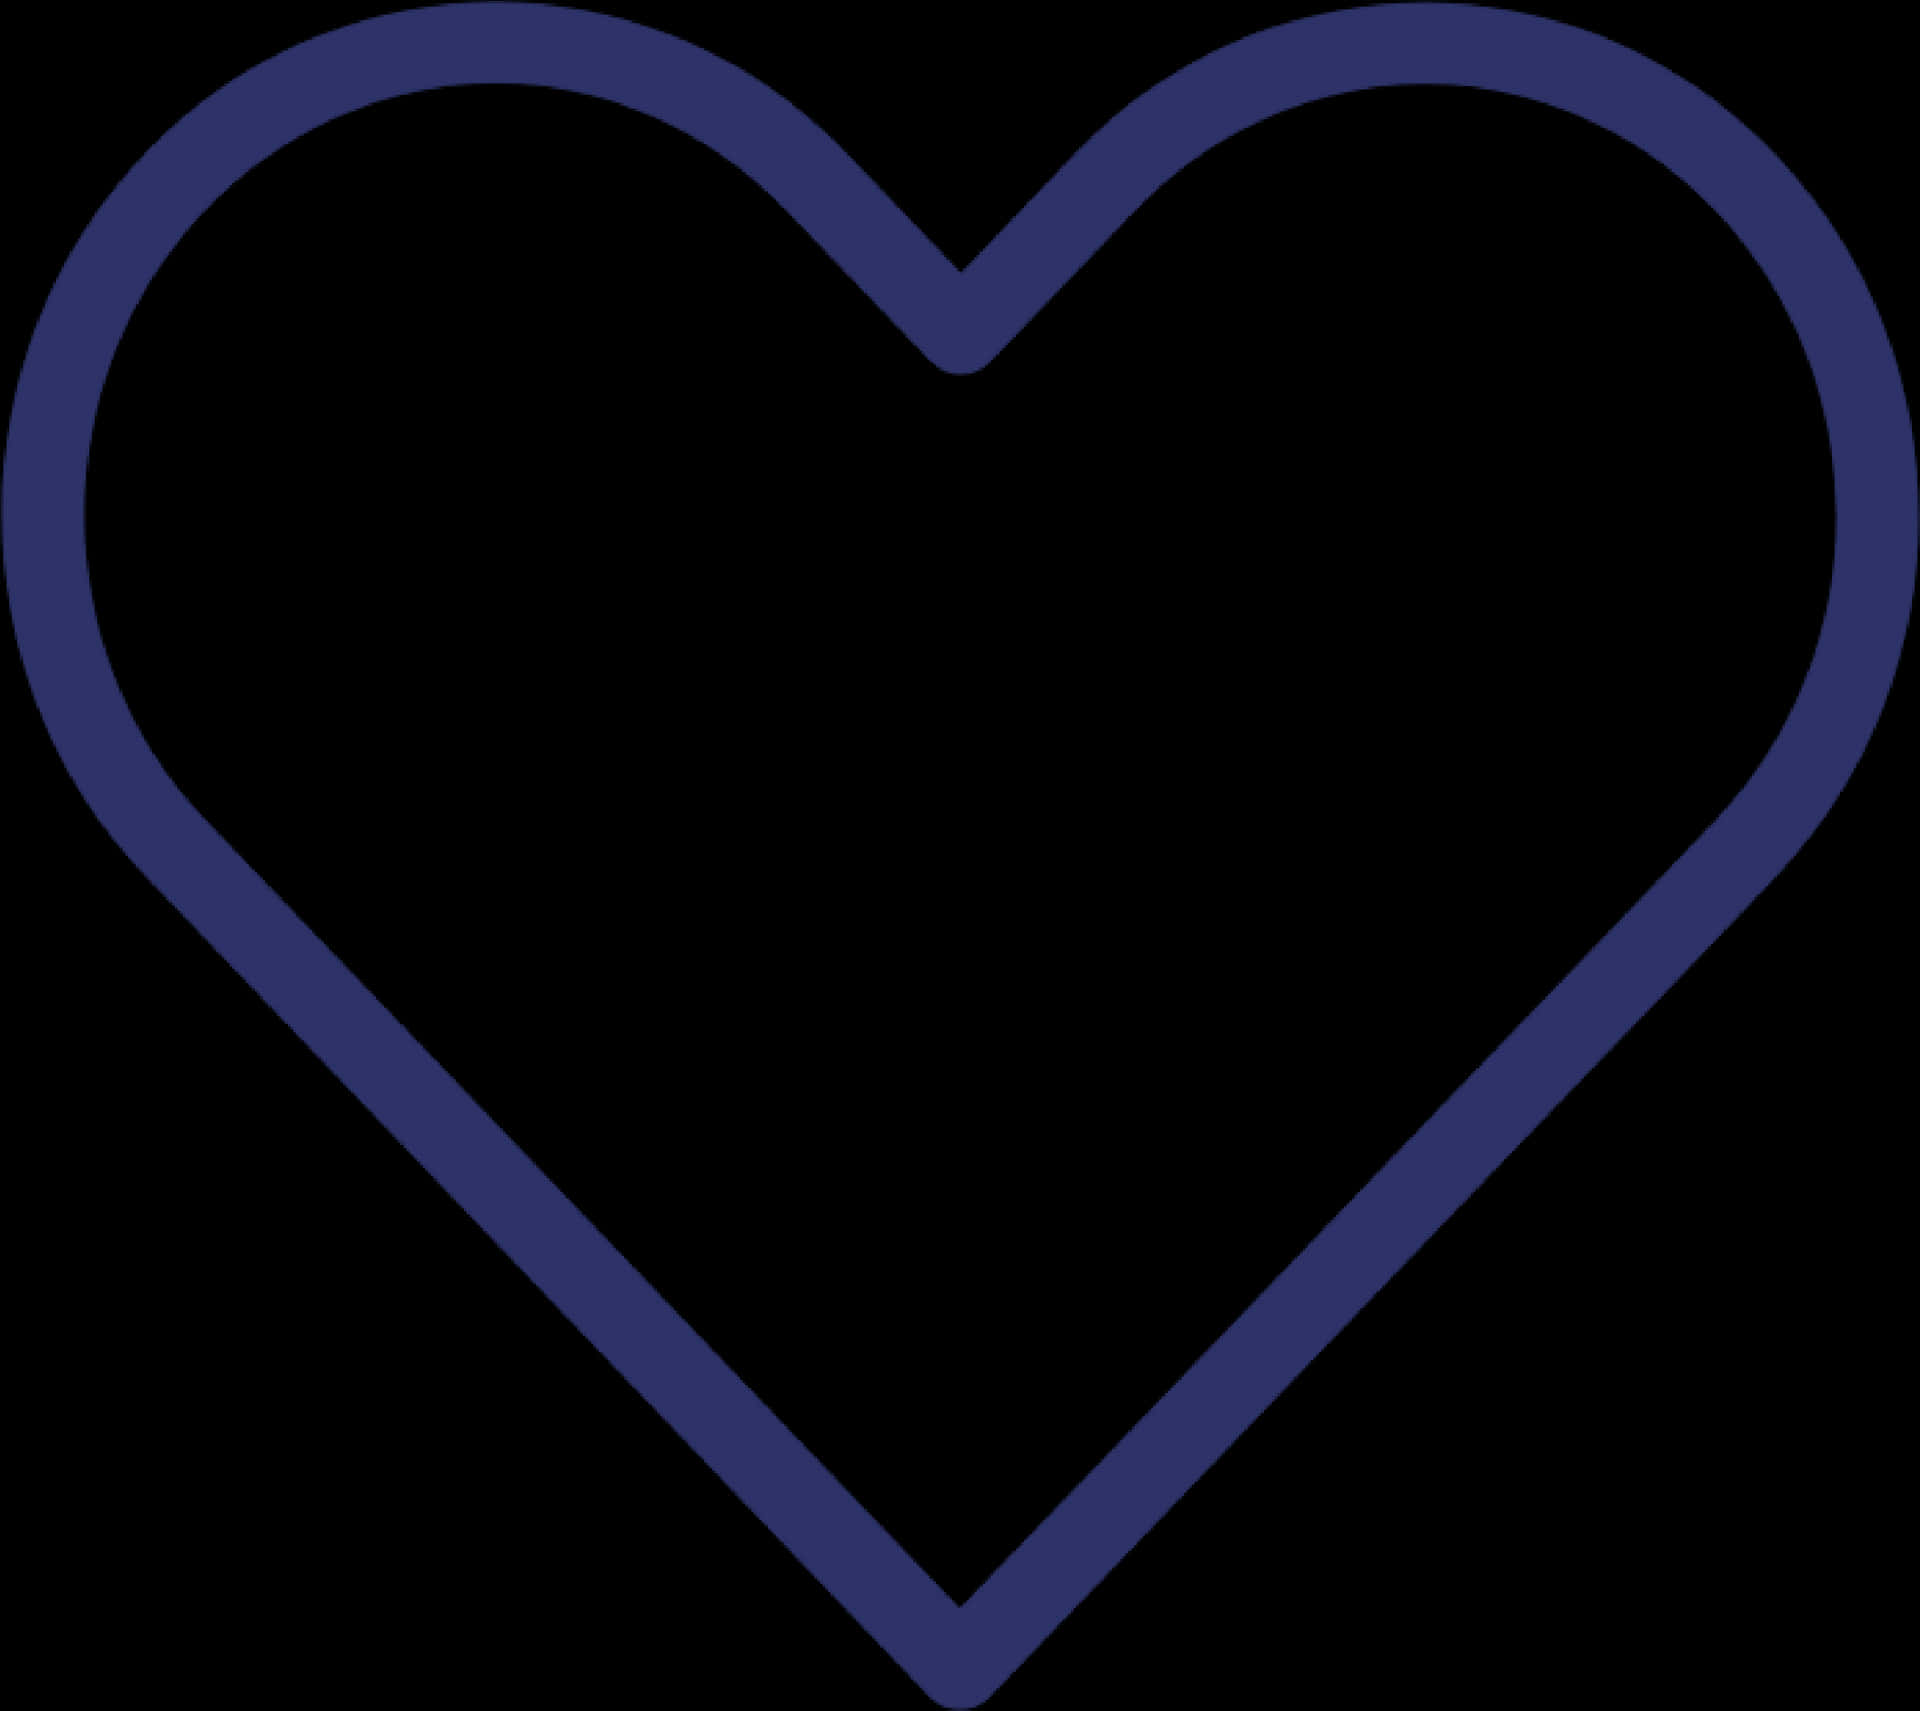 Blue Heart Outline Graphic PNG